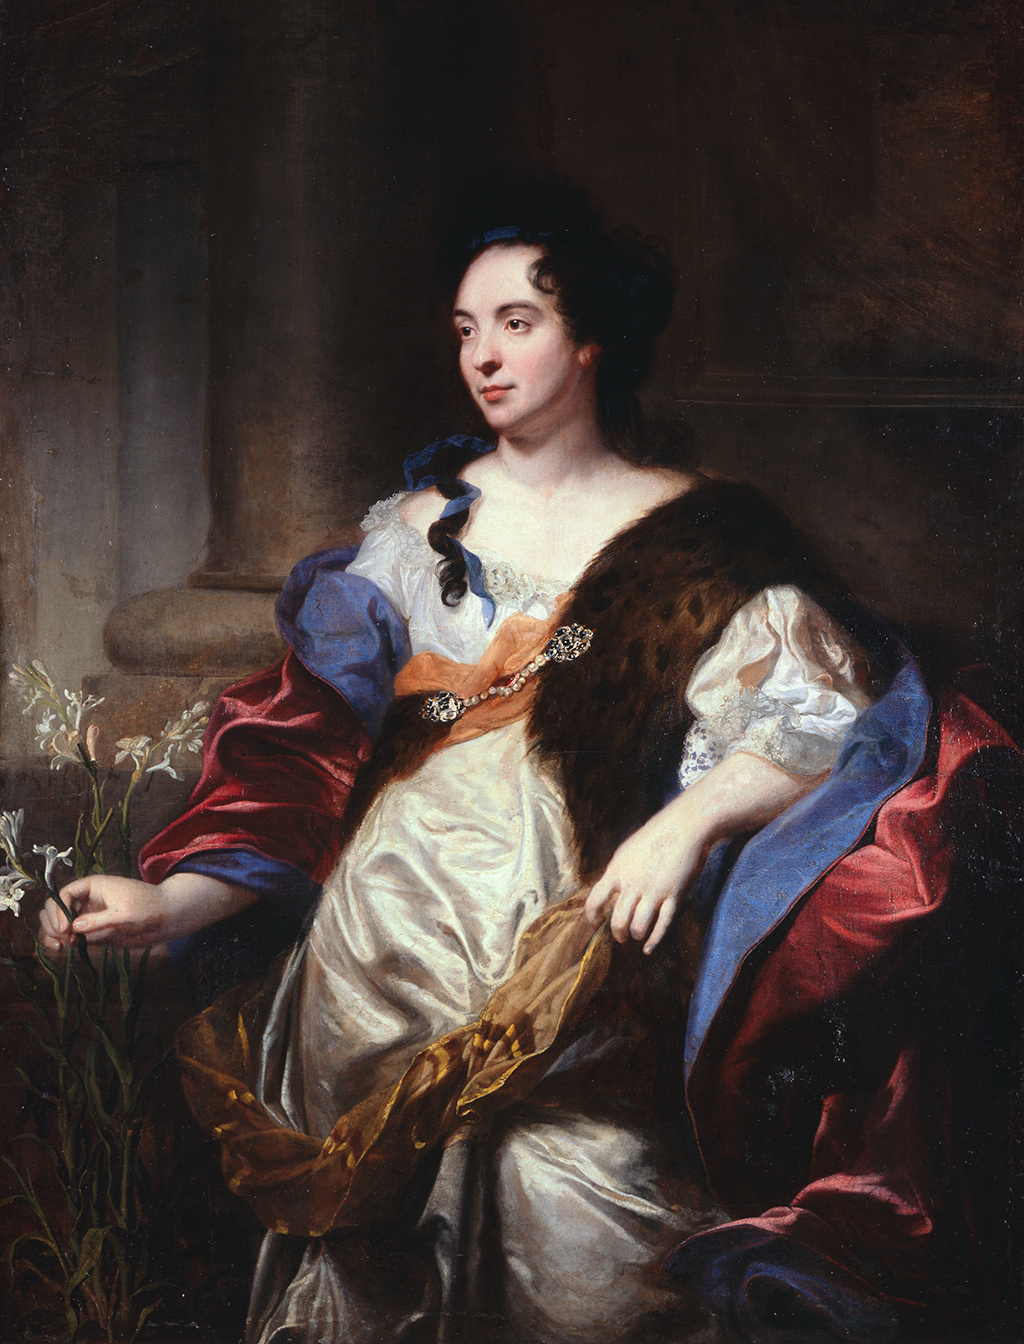 A light-skinned, dark-haired woman, painted from the knees up, stands leaning on her bent left arm against a stone ledge. She wears a white dress with a yellow sash and a red cloak lined in blue. Along her left shoulder is a brown and black-spotted animal pelt pinned with a jewelled clasp. She plucks a long stem off a white-flowered plant.